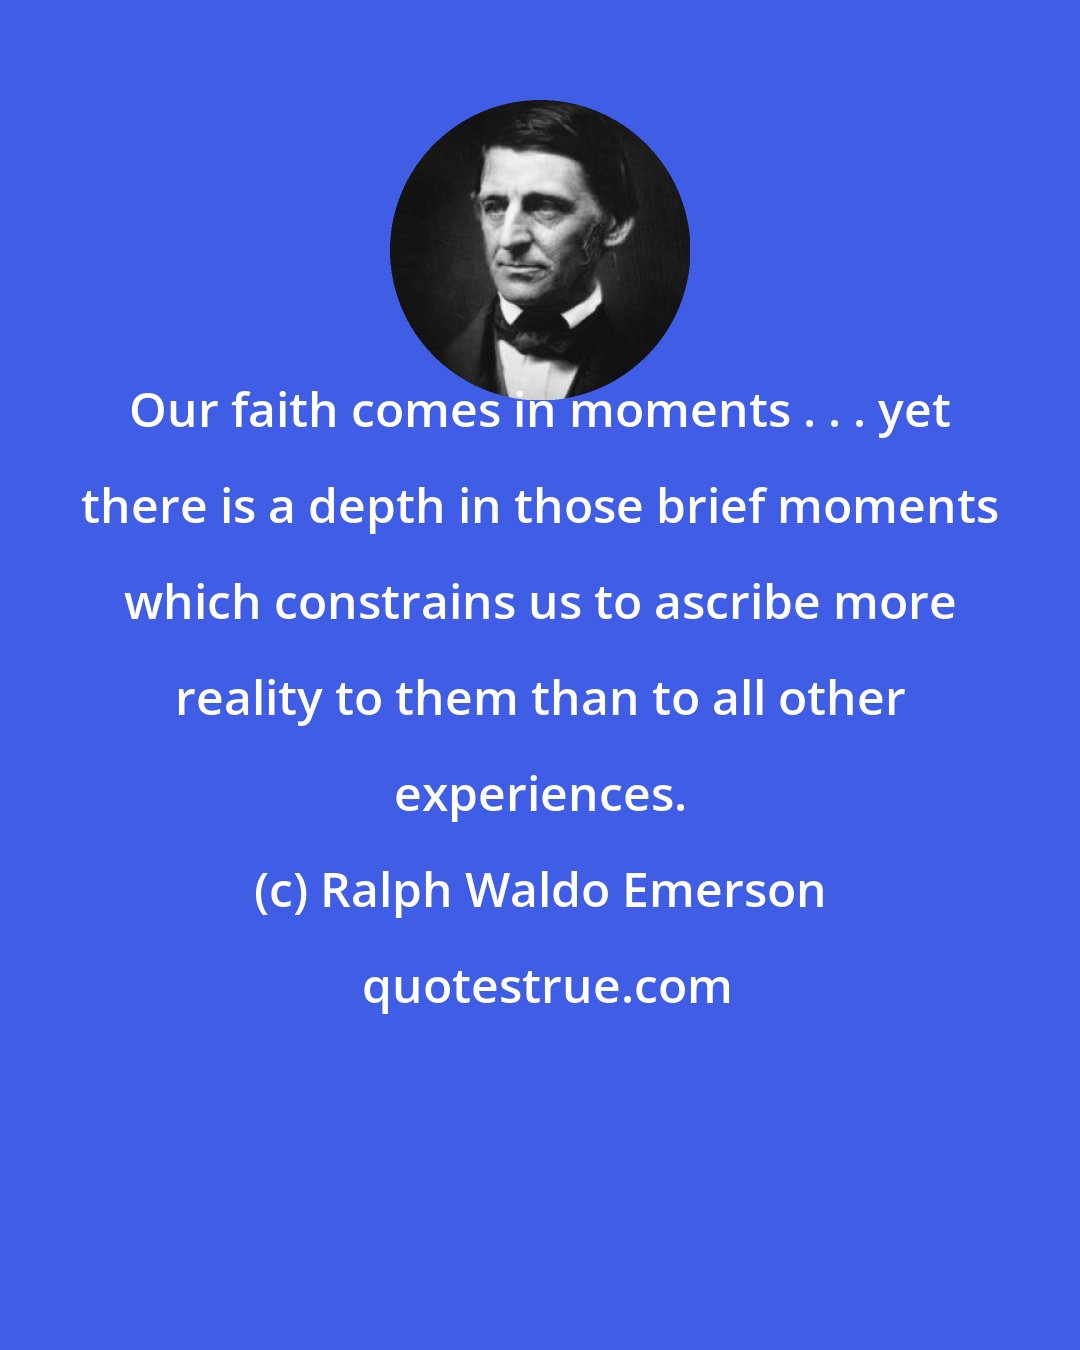 Ralph Waldo Emerson: Our faith comes in moments . . . yet there is a depth in those brief moments which constrains us to ascribe more reality to them than to all other experiences.